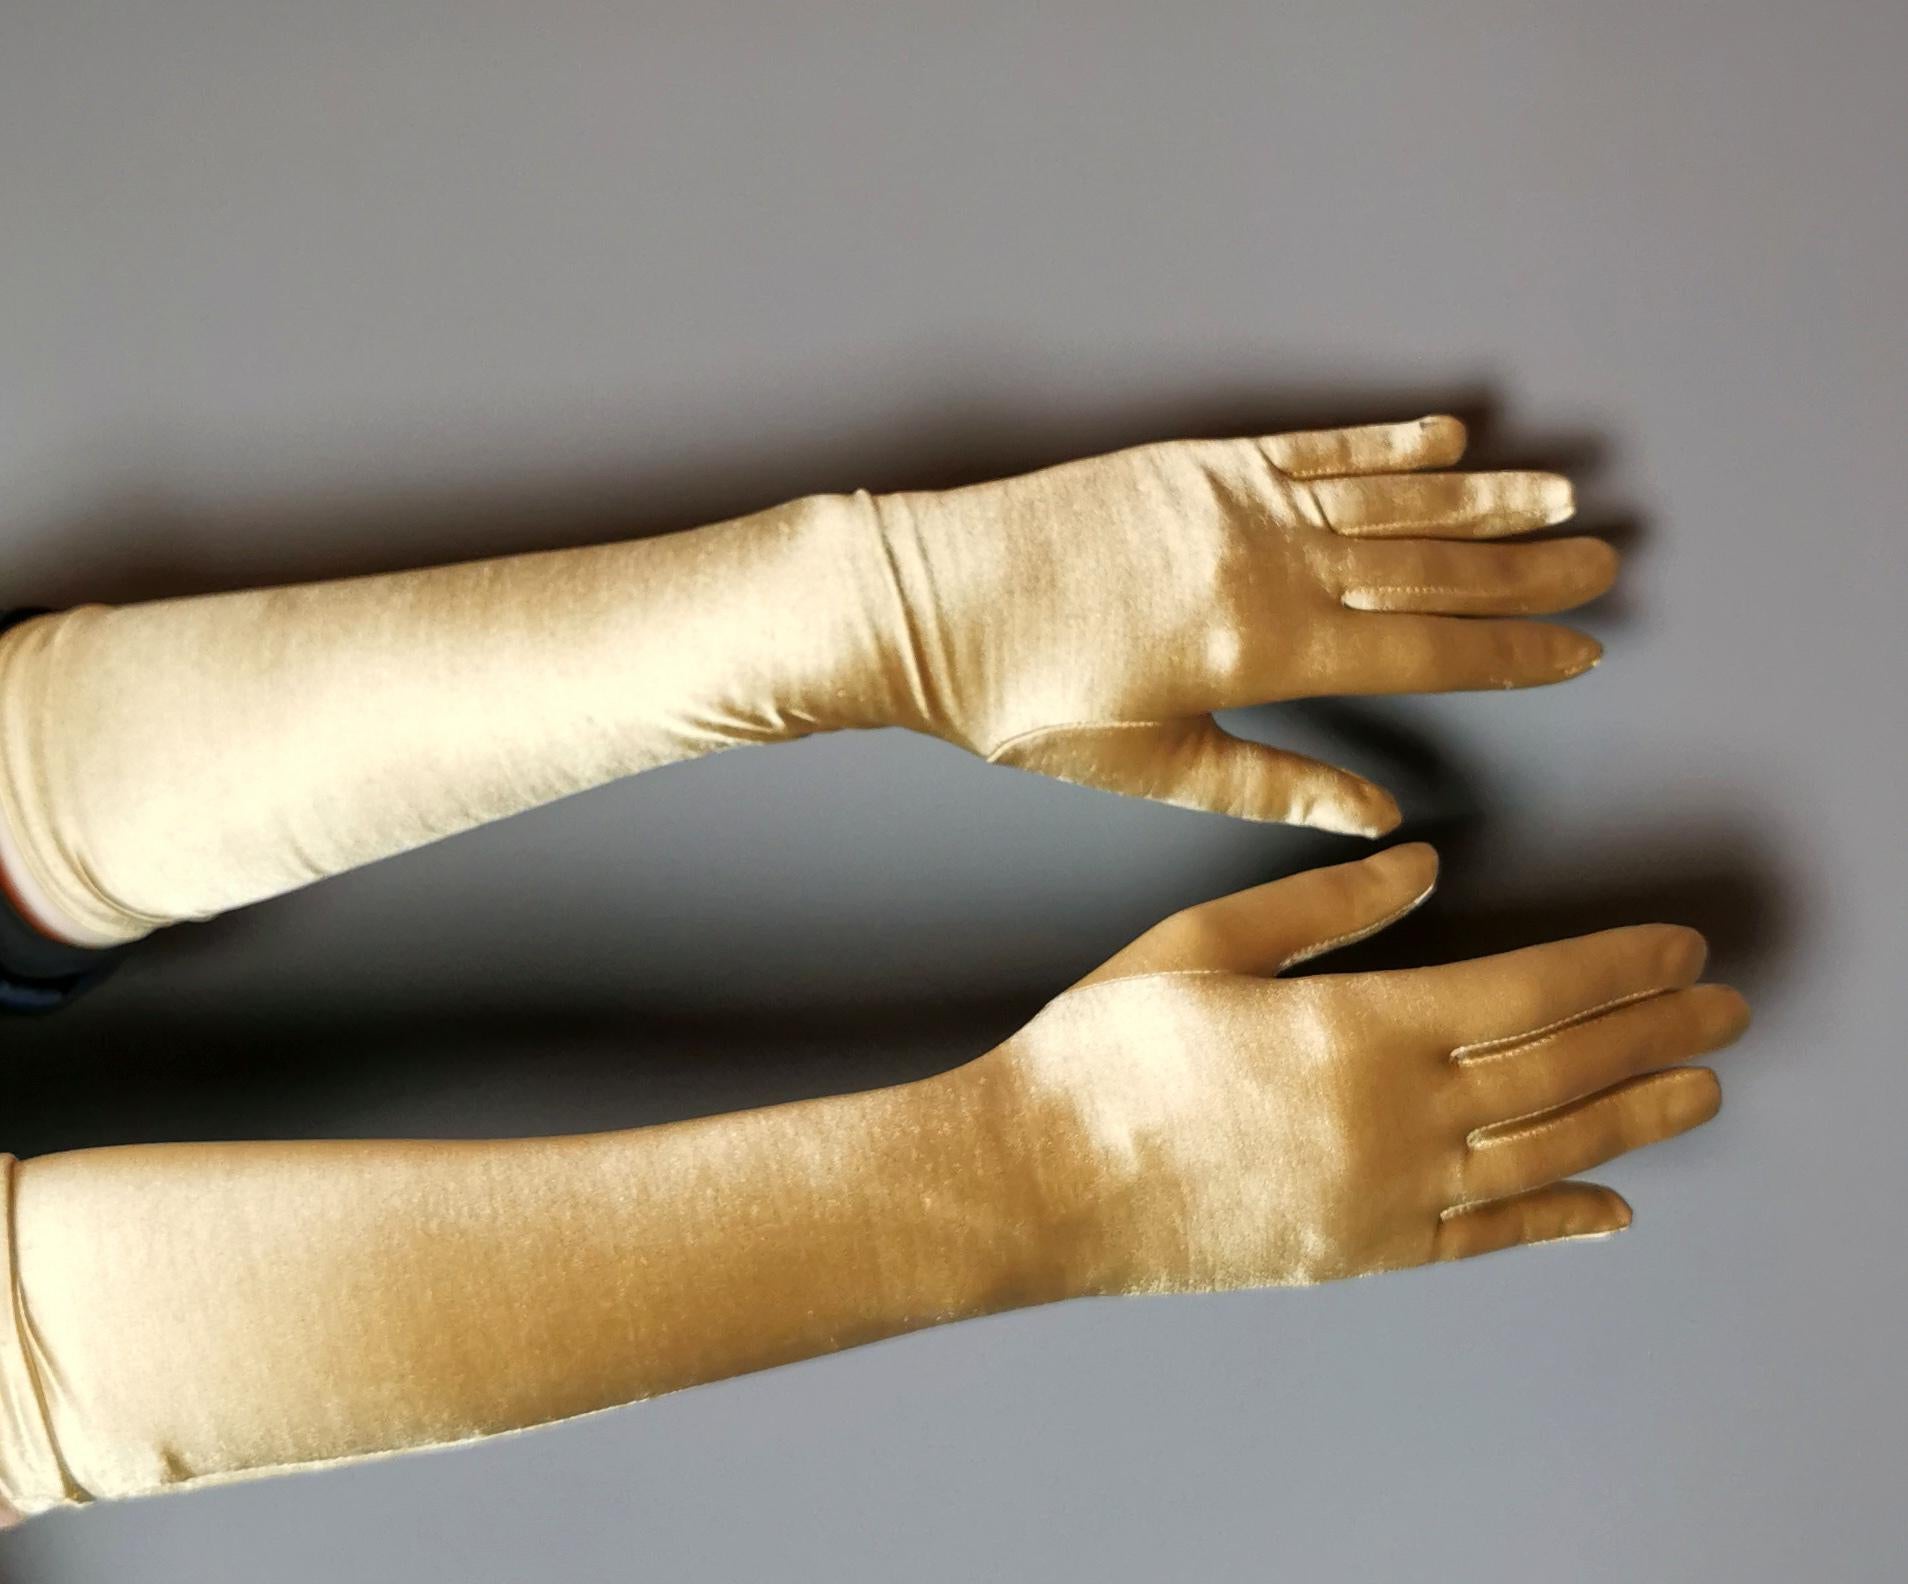 A gorgeous pair of vintage gold coloured long length gloves.

Also referred to as opera gloves this pair are very glam! A rich gold tone nylon with a touch of elastane.

They hug the arm and are sleek and smooth.

They are labelled with the fabric